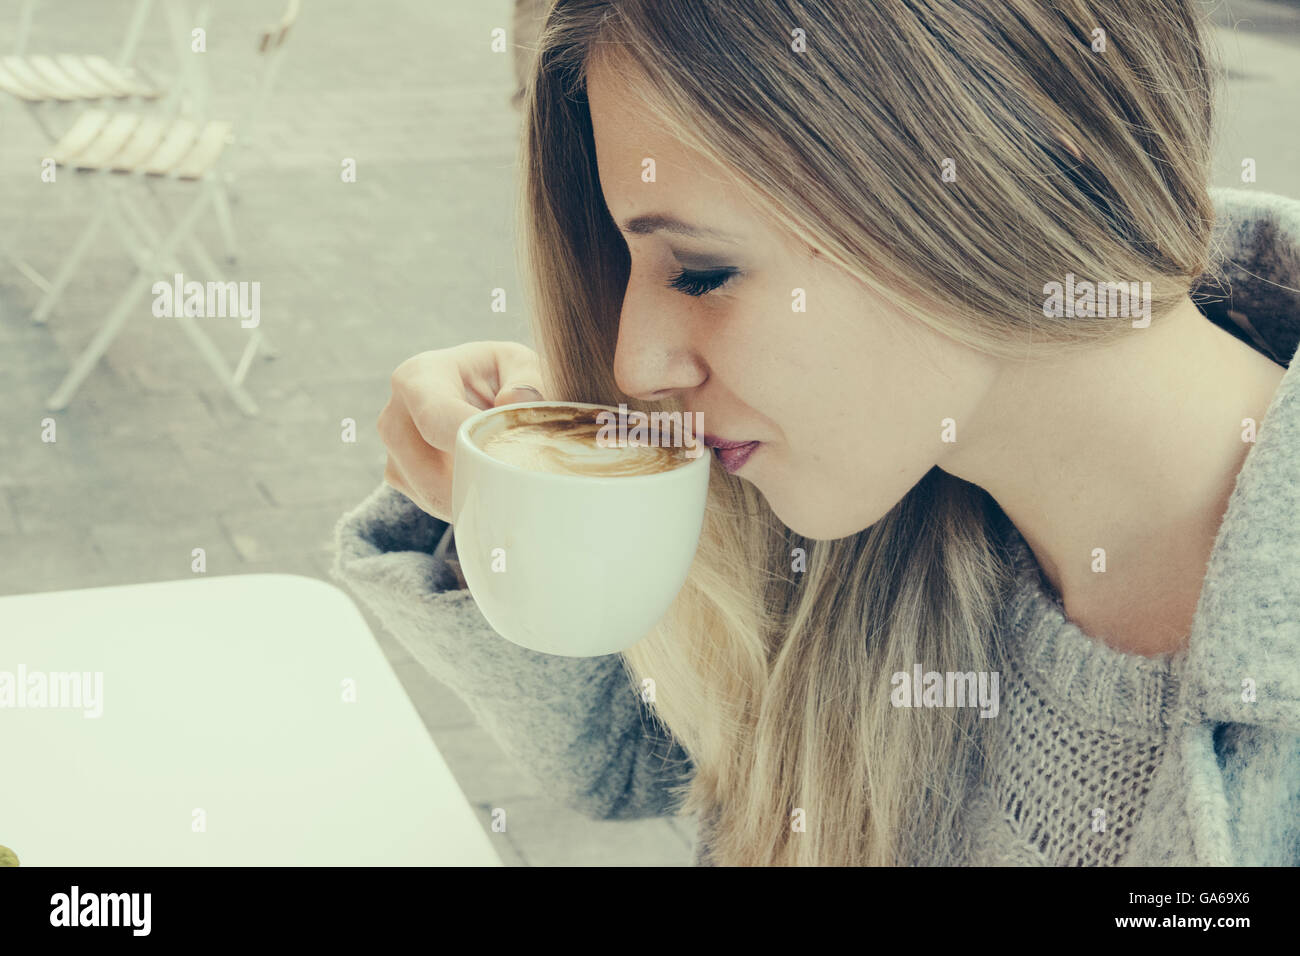 Side view of young blonde woman drinking latte while sitting outdoors in cafe Stock Photo